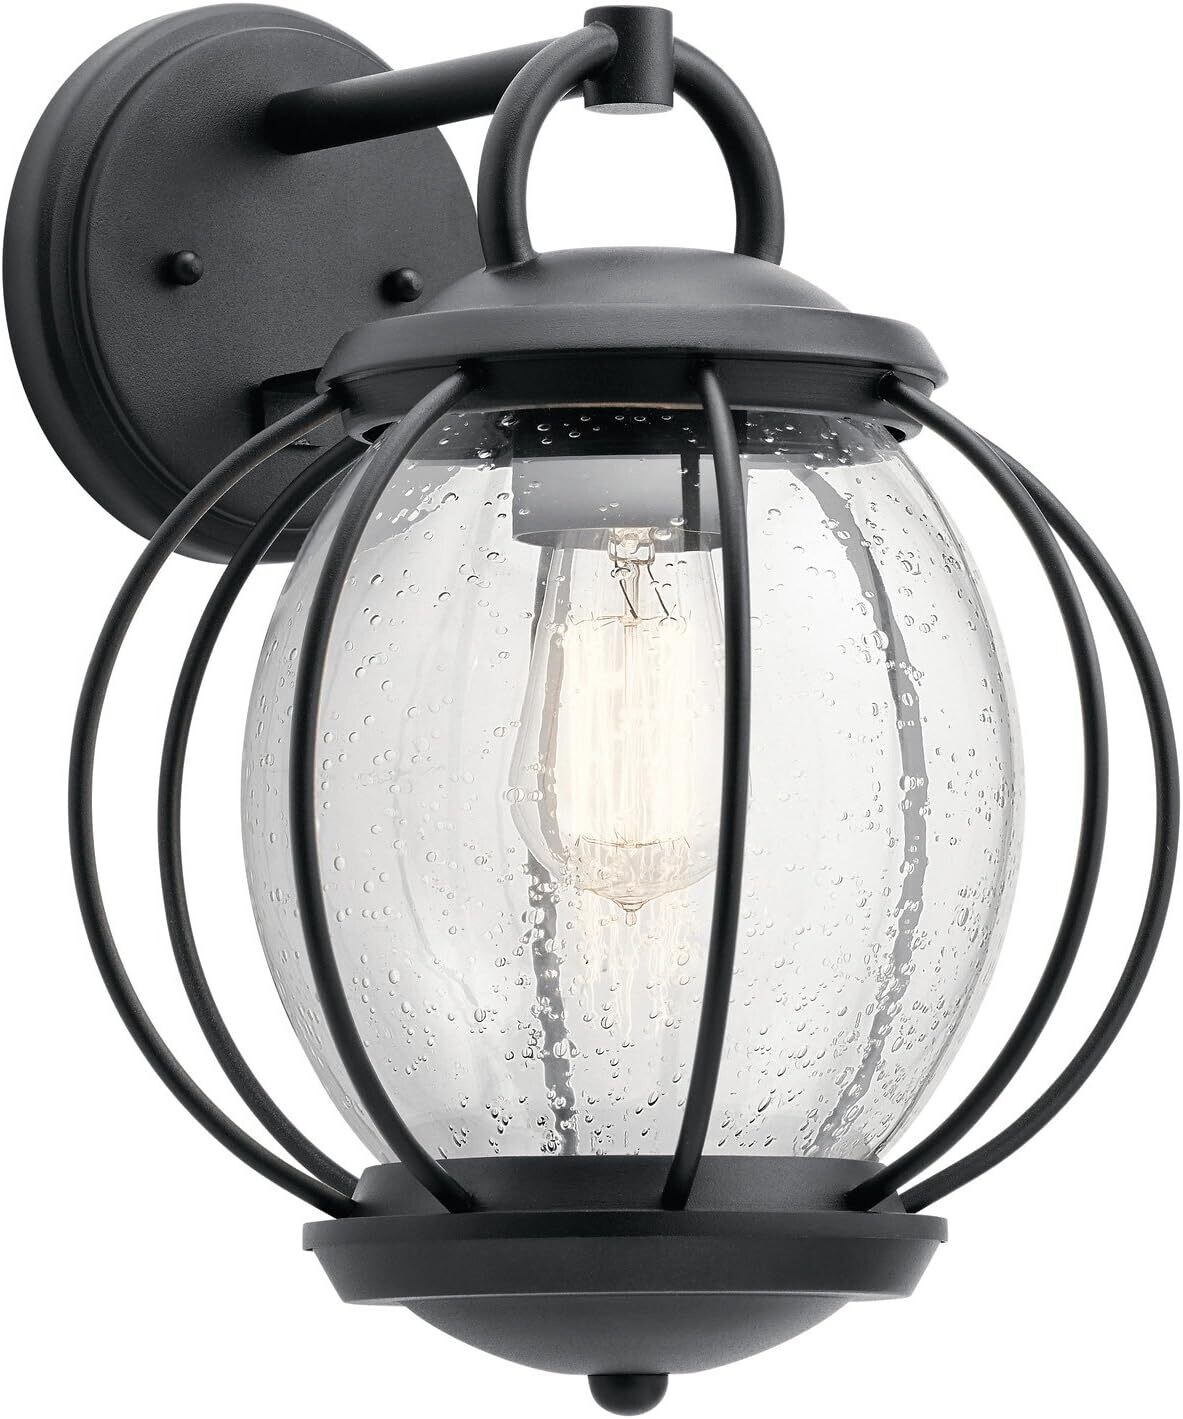 Vandalia 1-Light Large 14" Outdoor Wall Mount Textured Black Finish and Seeded Globe glass